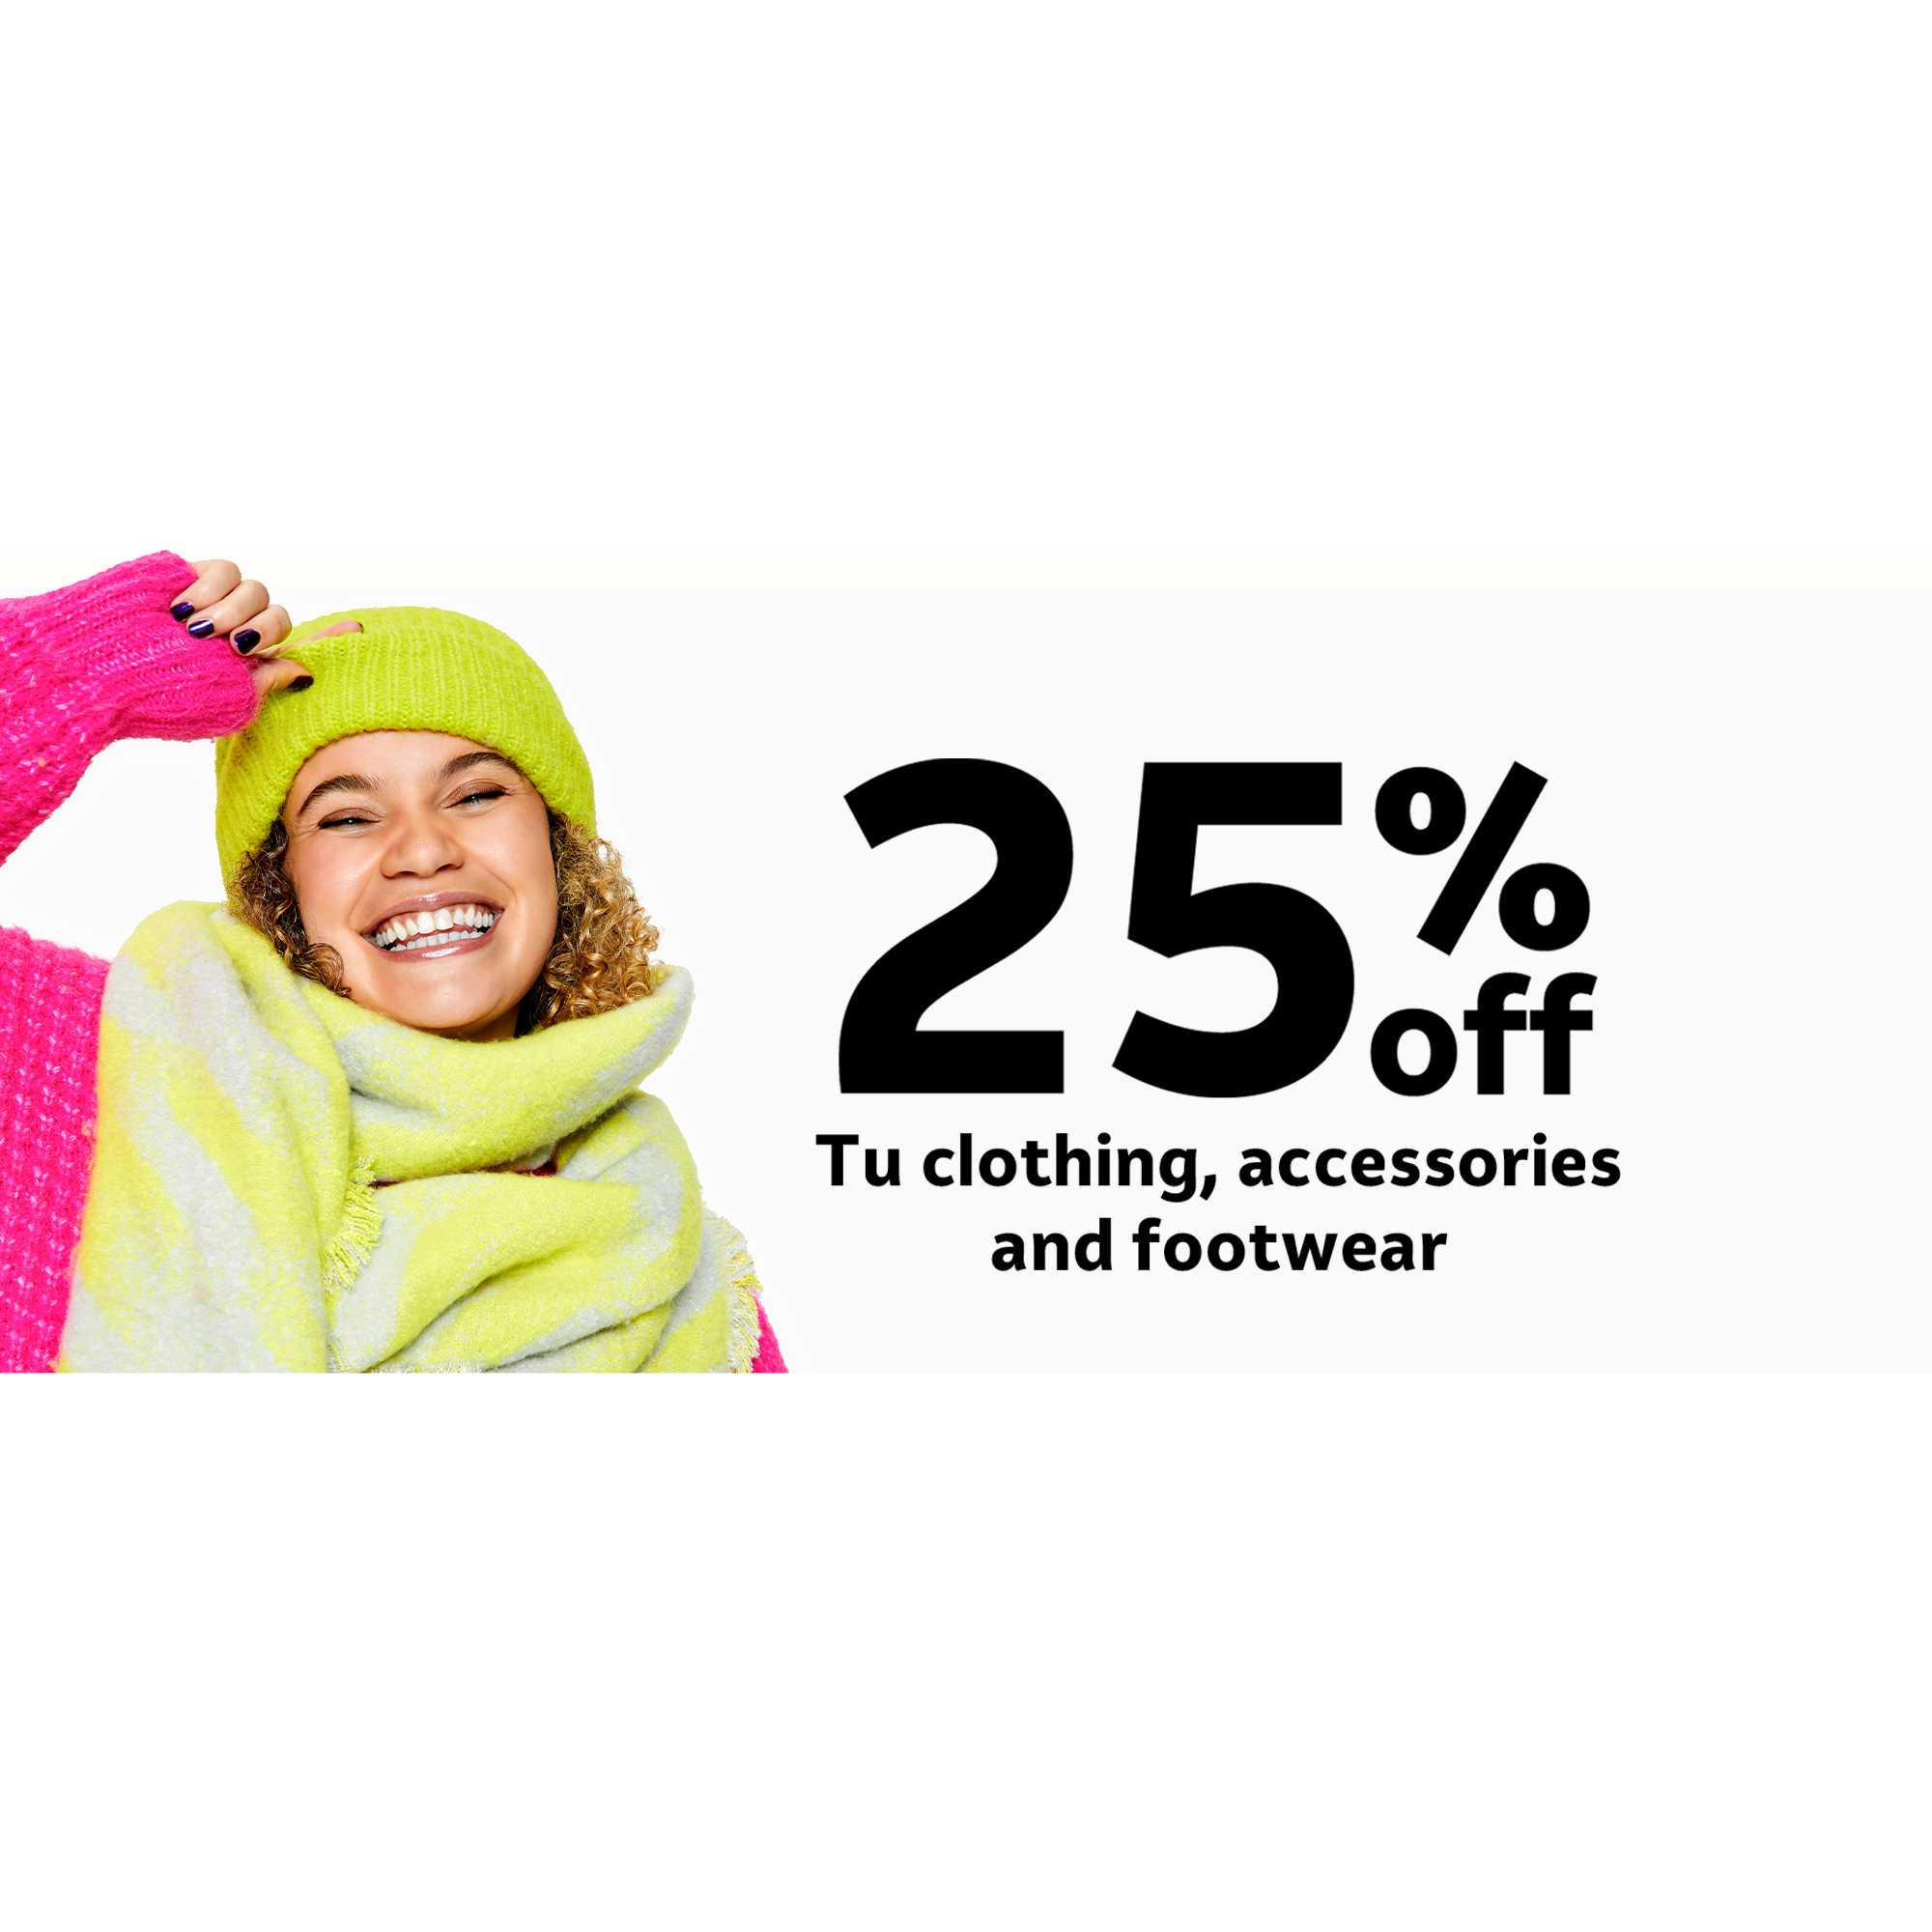 25% off Tu Clothing, accessories and footwear. Ends 23:59 on 9 December. Exclusions apply.